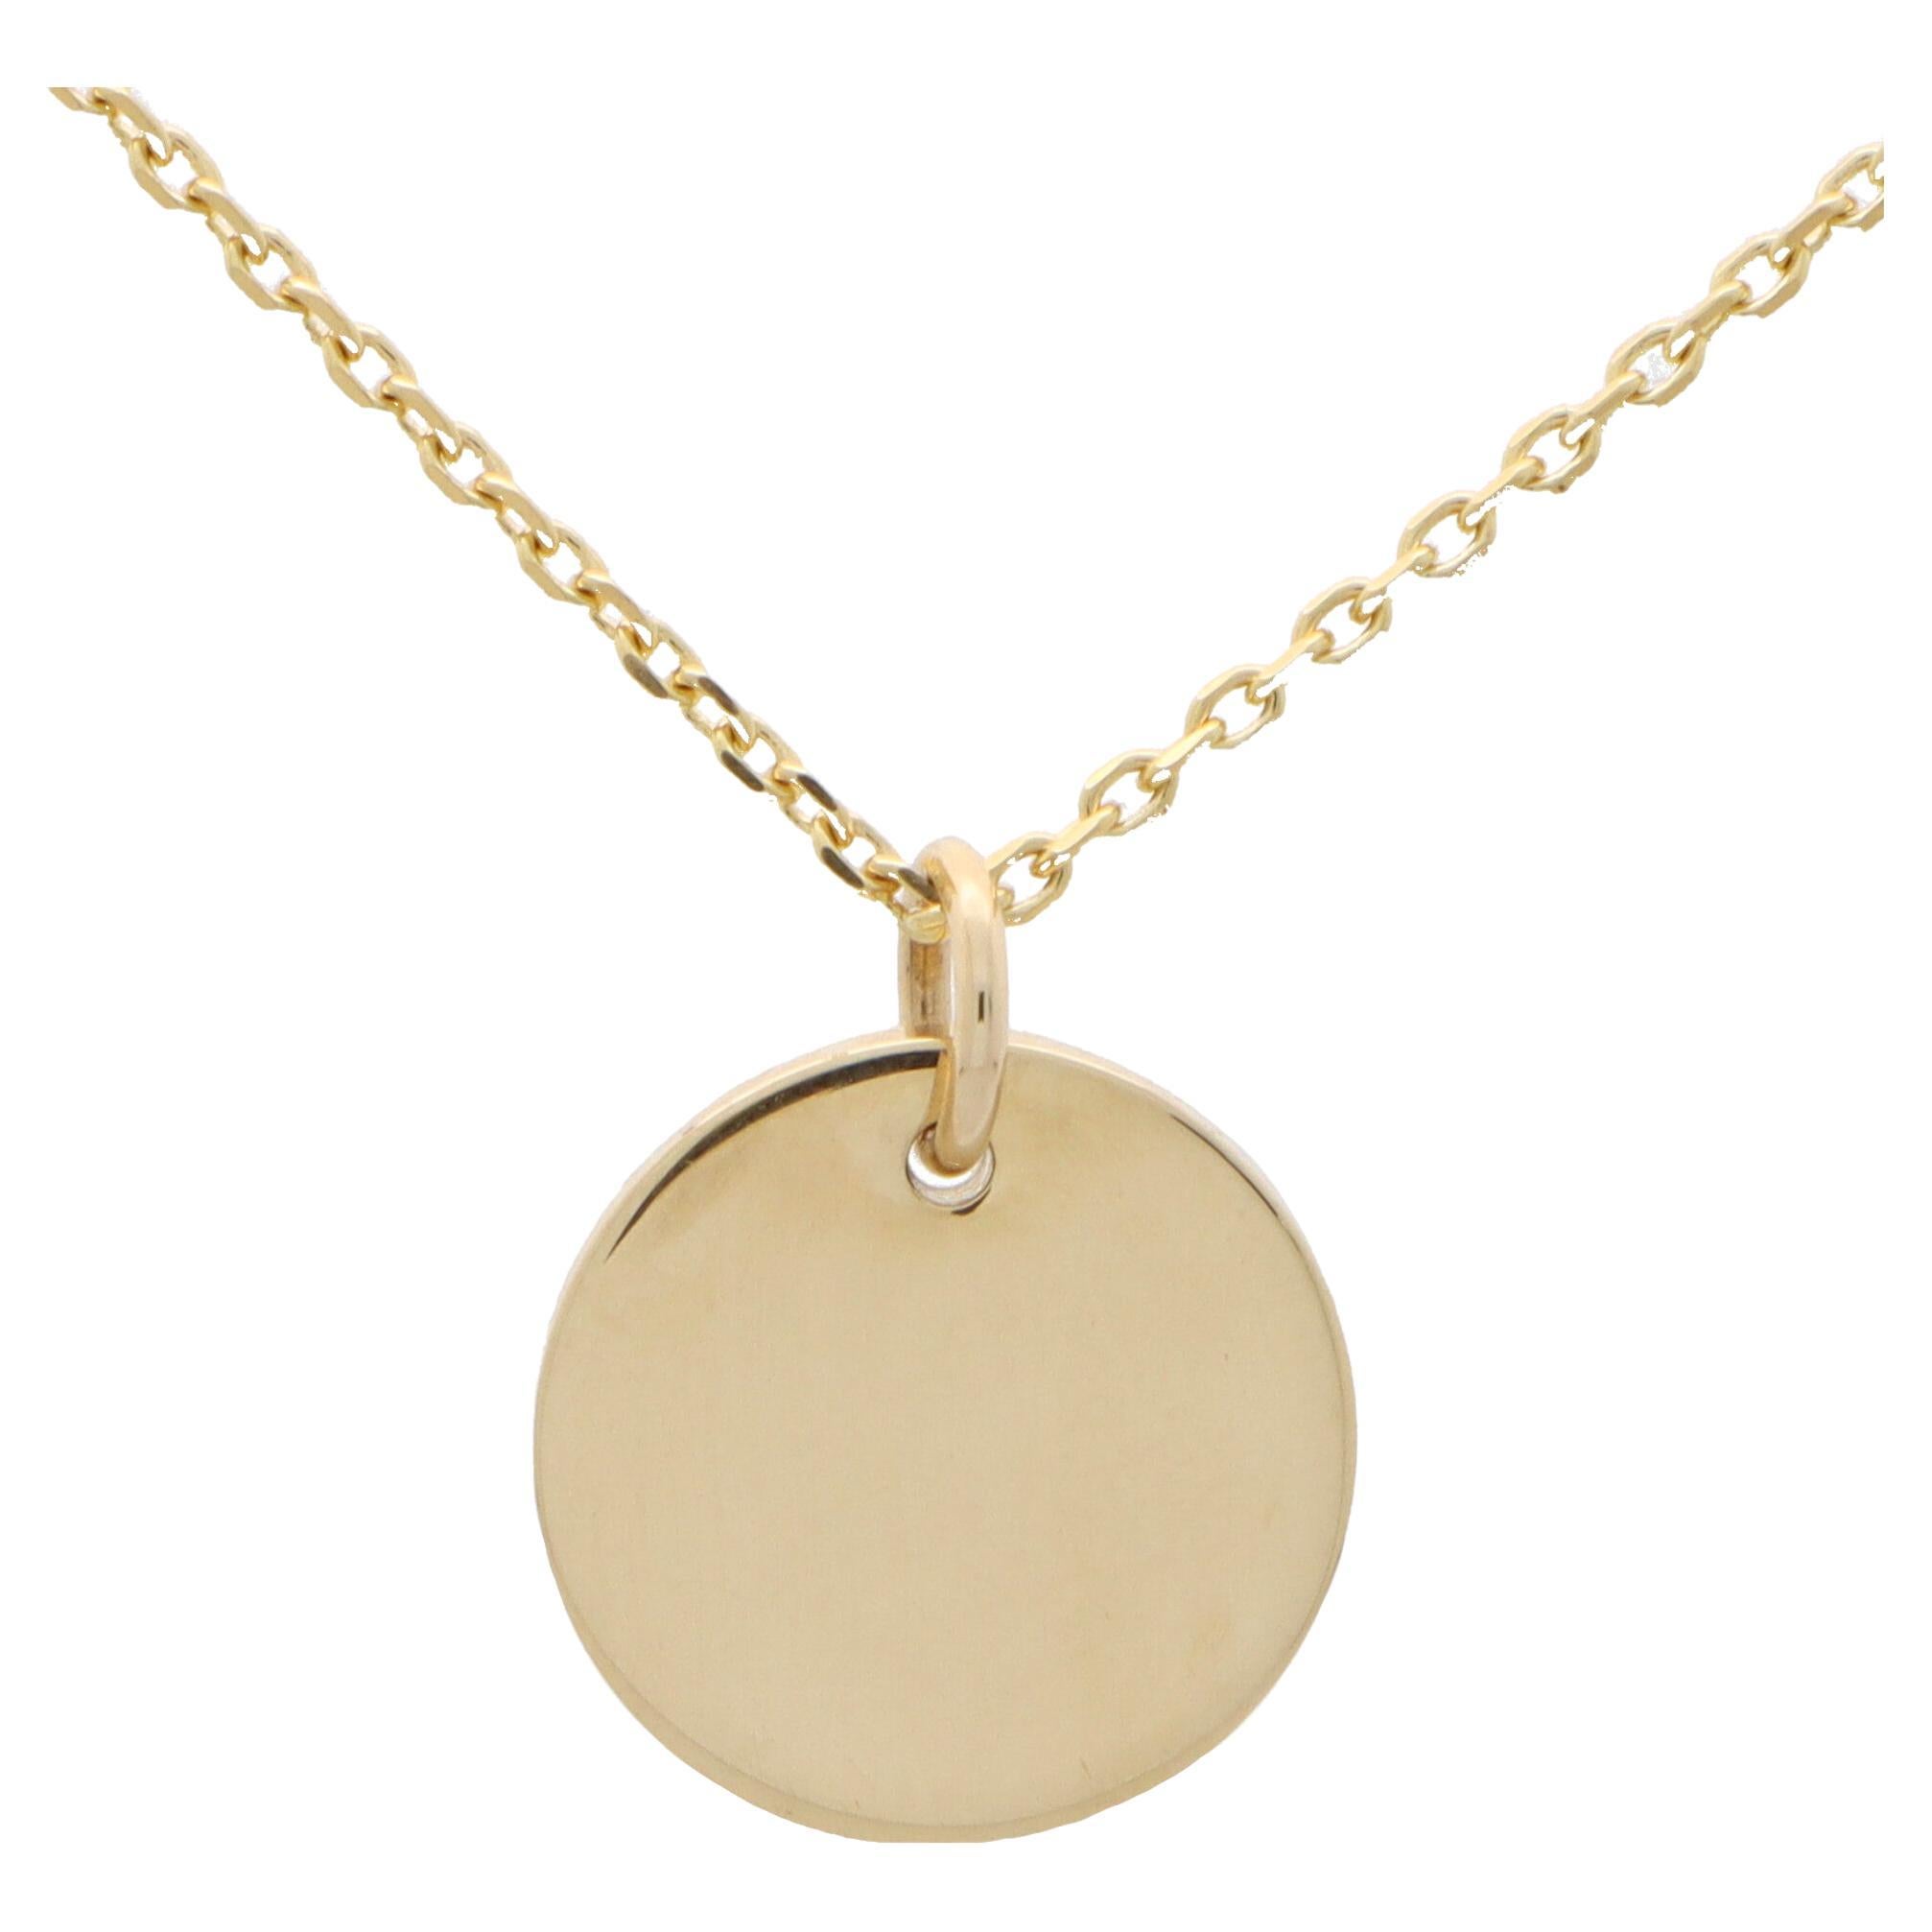 Solid 9k Yellow Gold Circular Disc Pendant / Cham For Sale